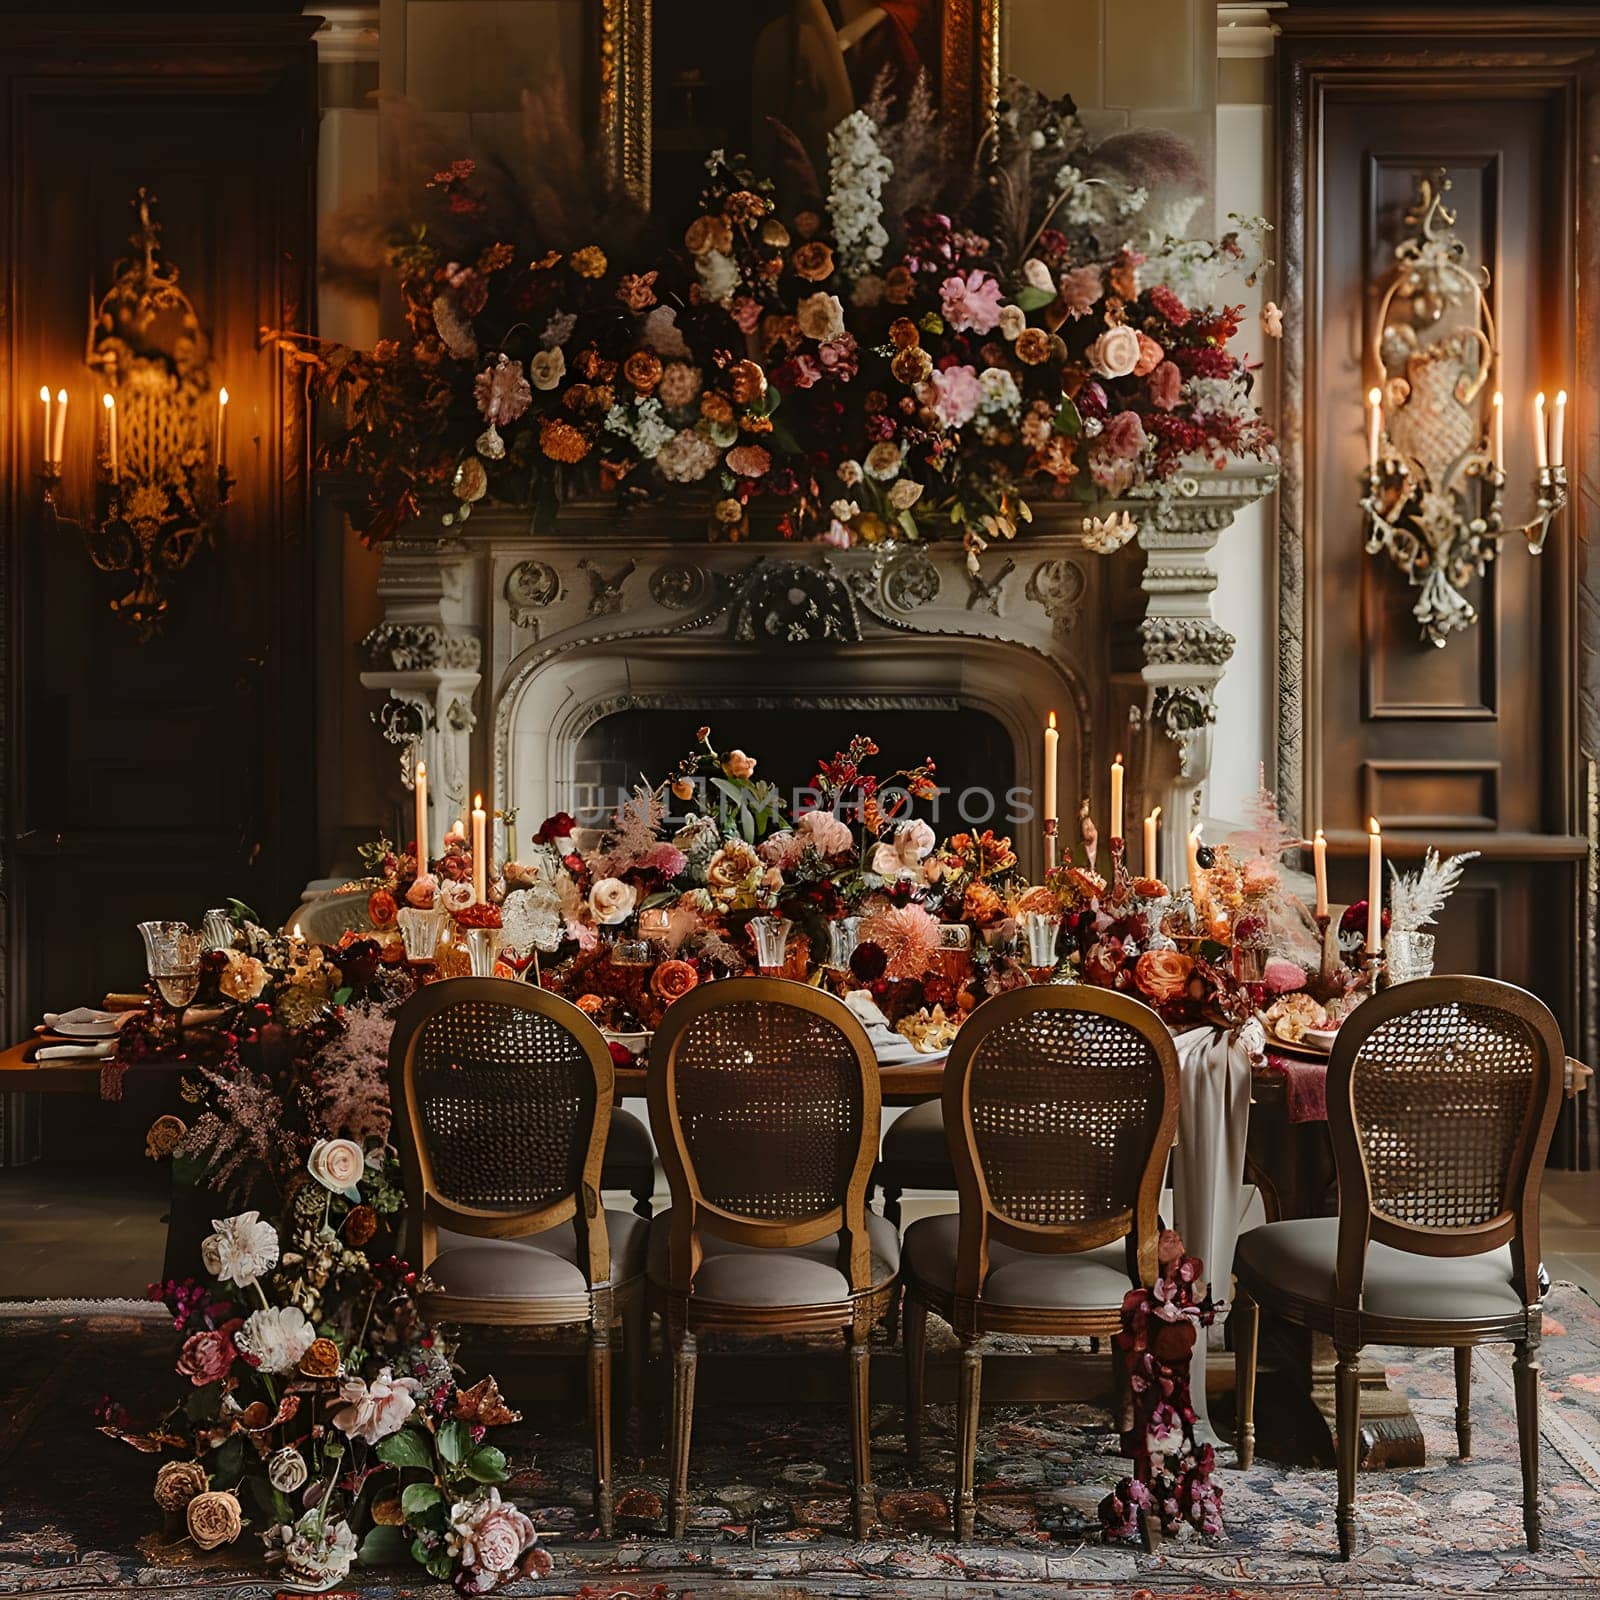 A table and chairs sit in front of a fireplace adorned with flowers and candles, creating a cozy and inviting atmosphere perfect for any event or occasion